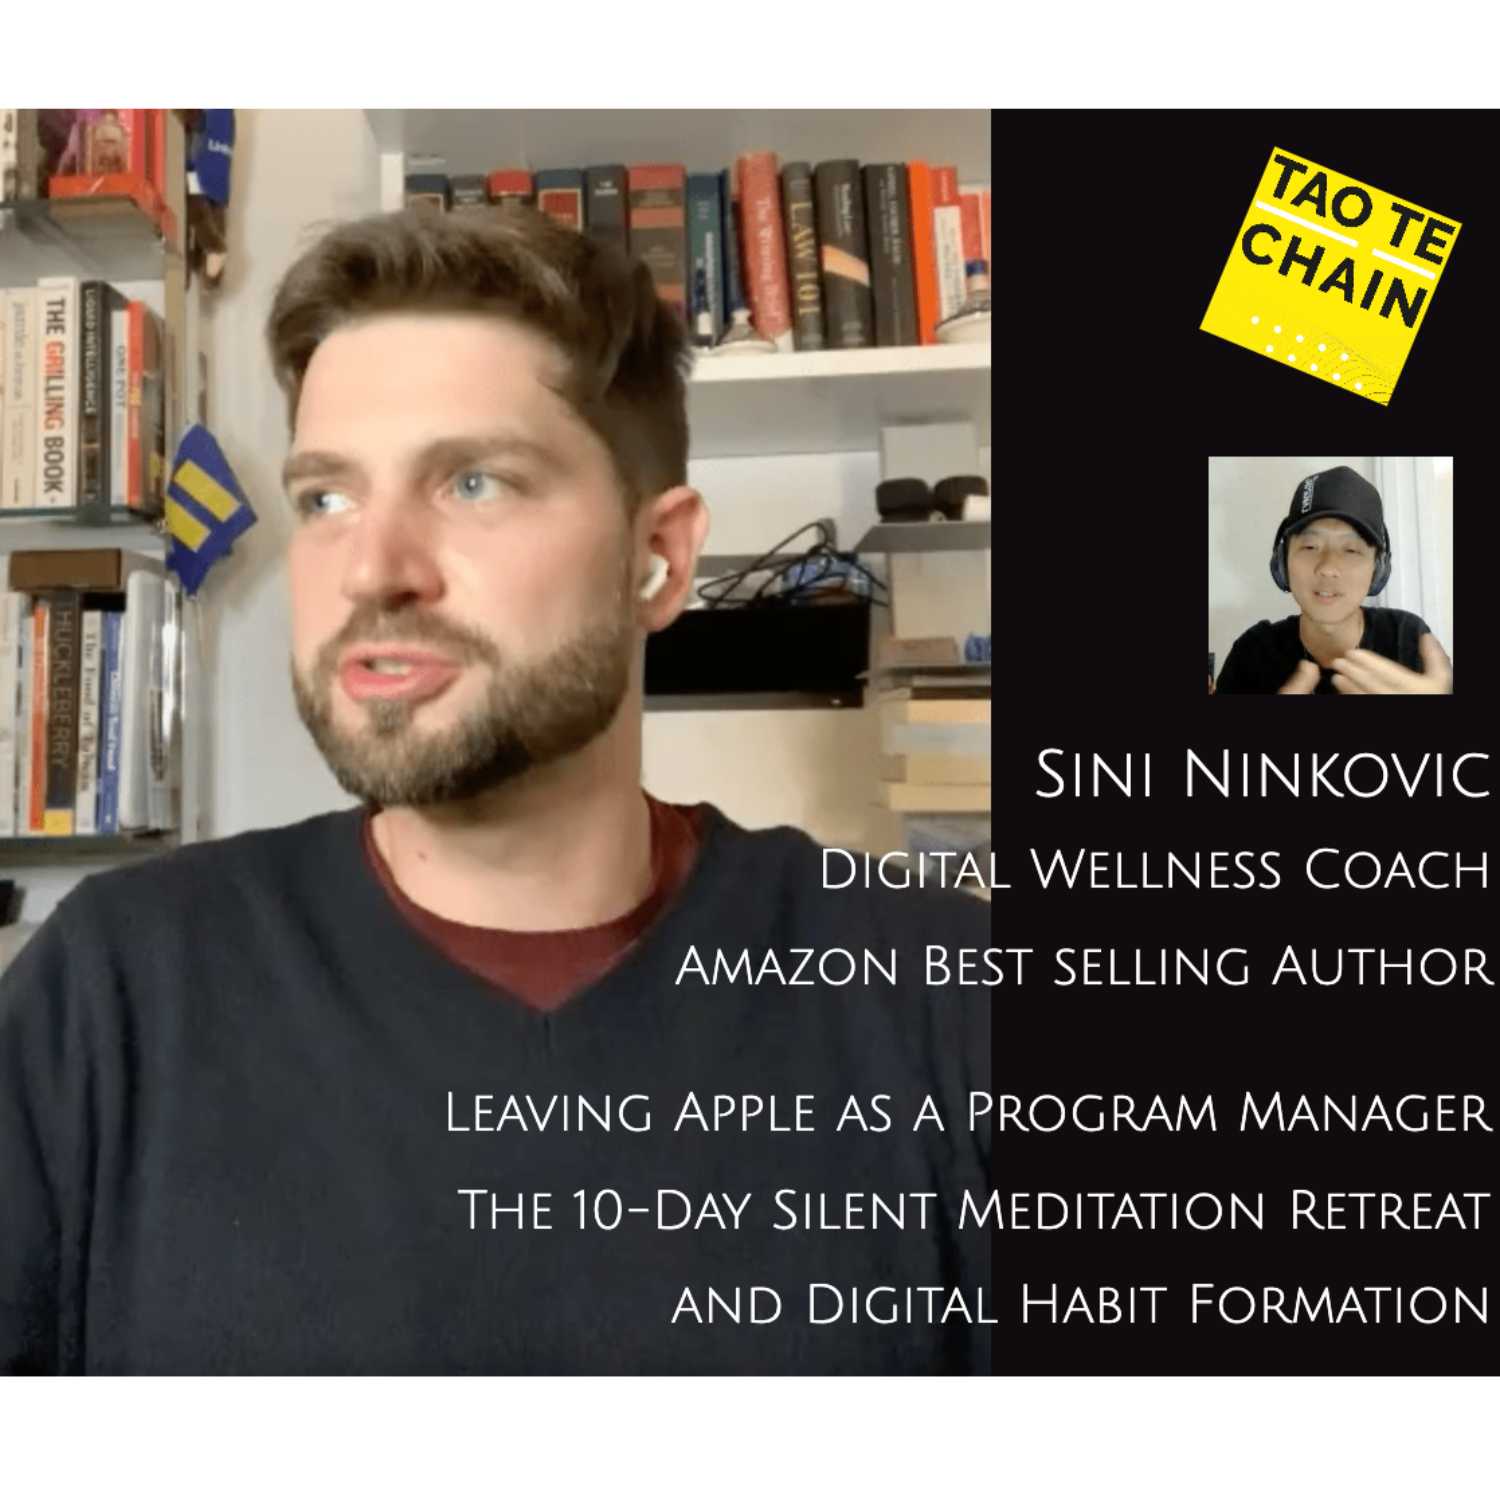 Sini Ninkovic - Leaving Apple as a Program Manager, The 10-Day Silent Meditation Retreat, and Digital Habit Formation